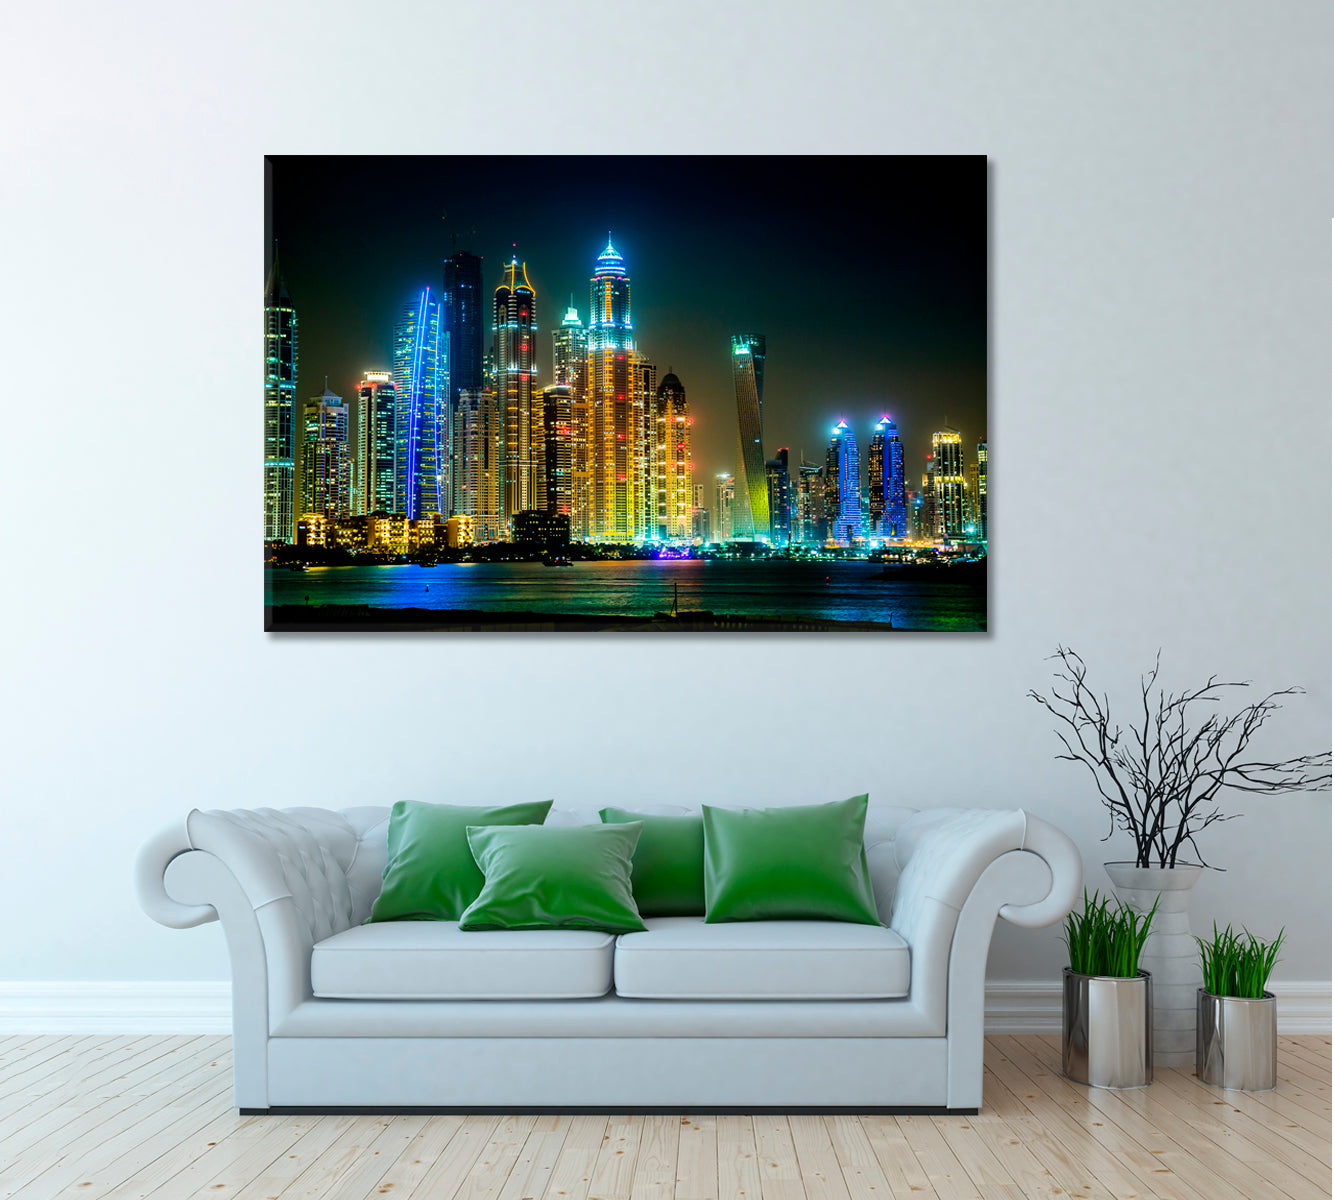 Dubai Downtown with City Lights at Night Canvas Print ArtLexy 1 Panel 24"x16" inches 